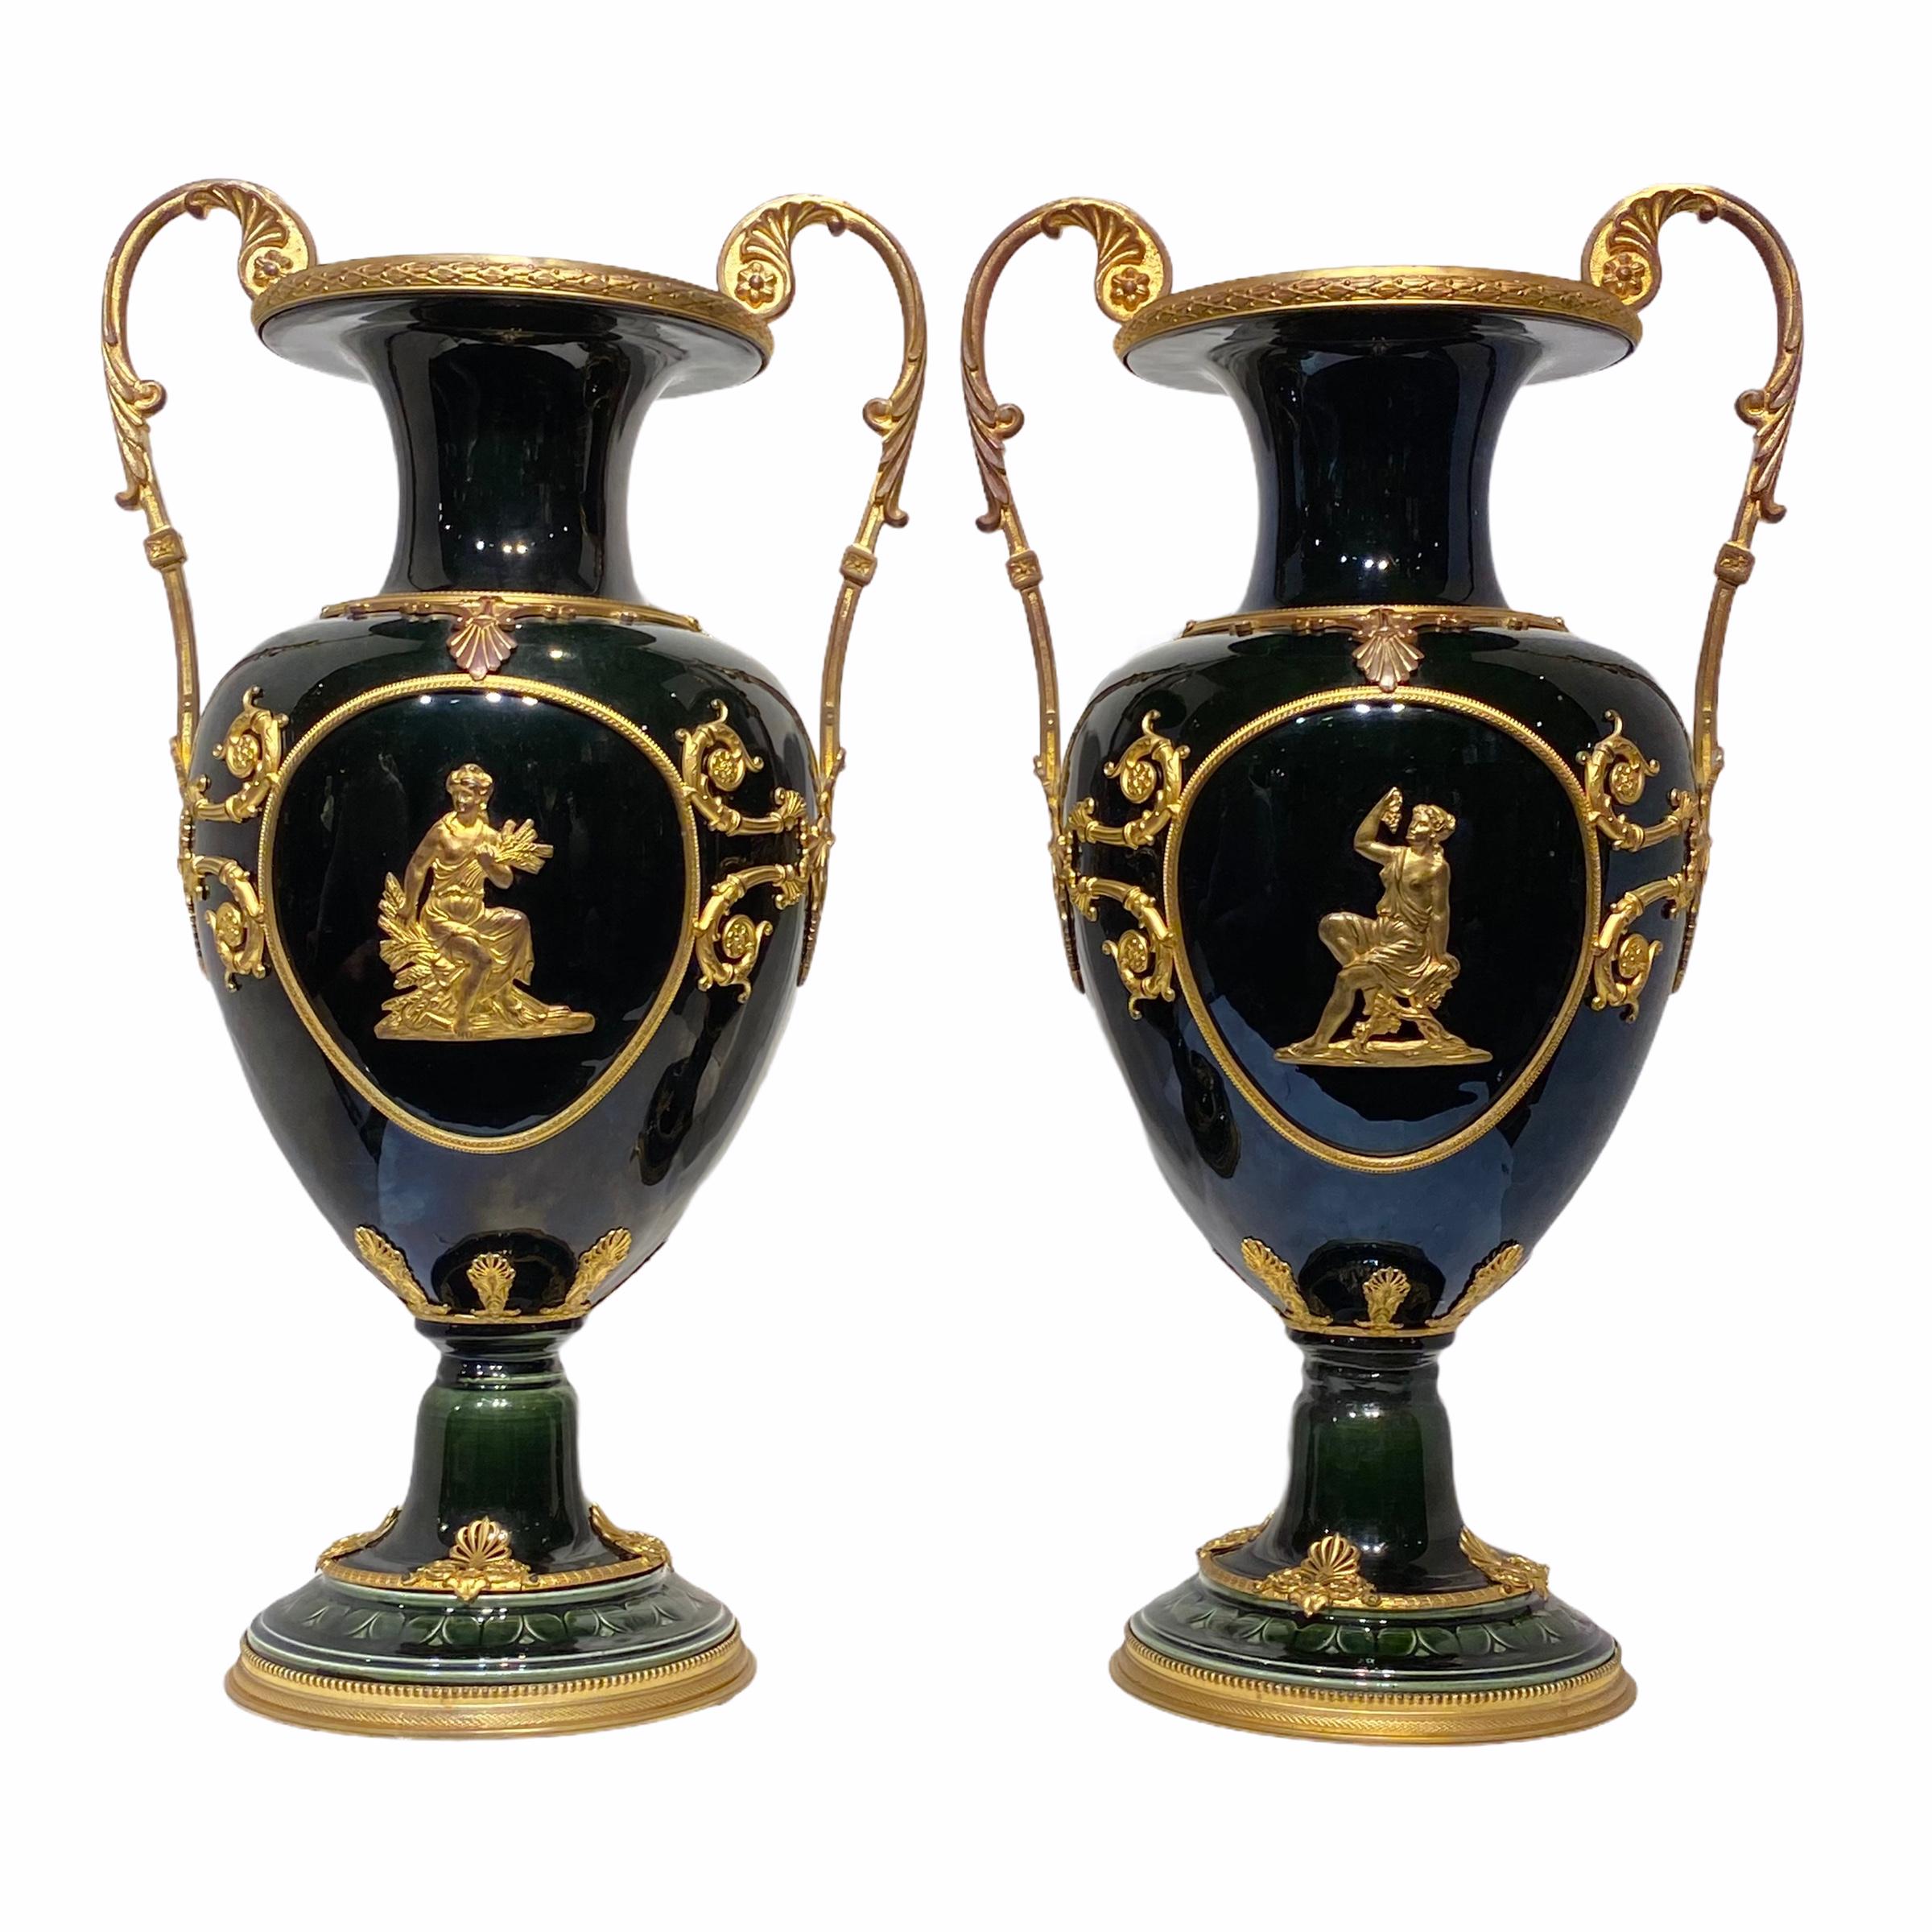 19th Century Iridescent Glazed Faience Vases with Neoclassical Gilt Bronze Mounts For Sale